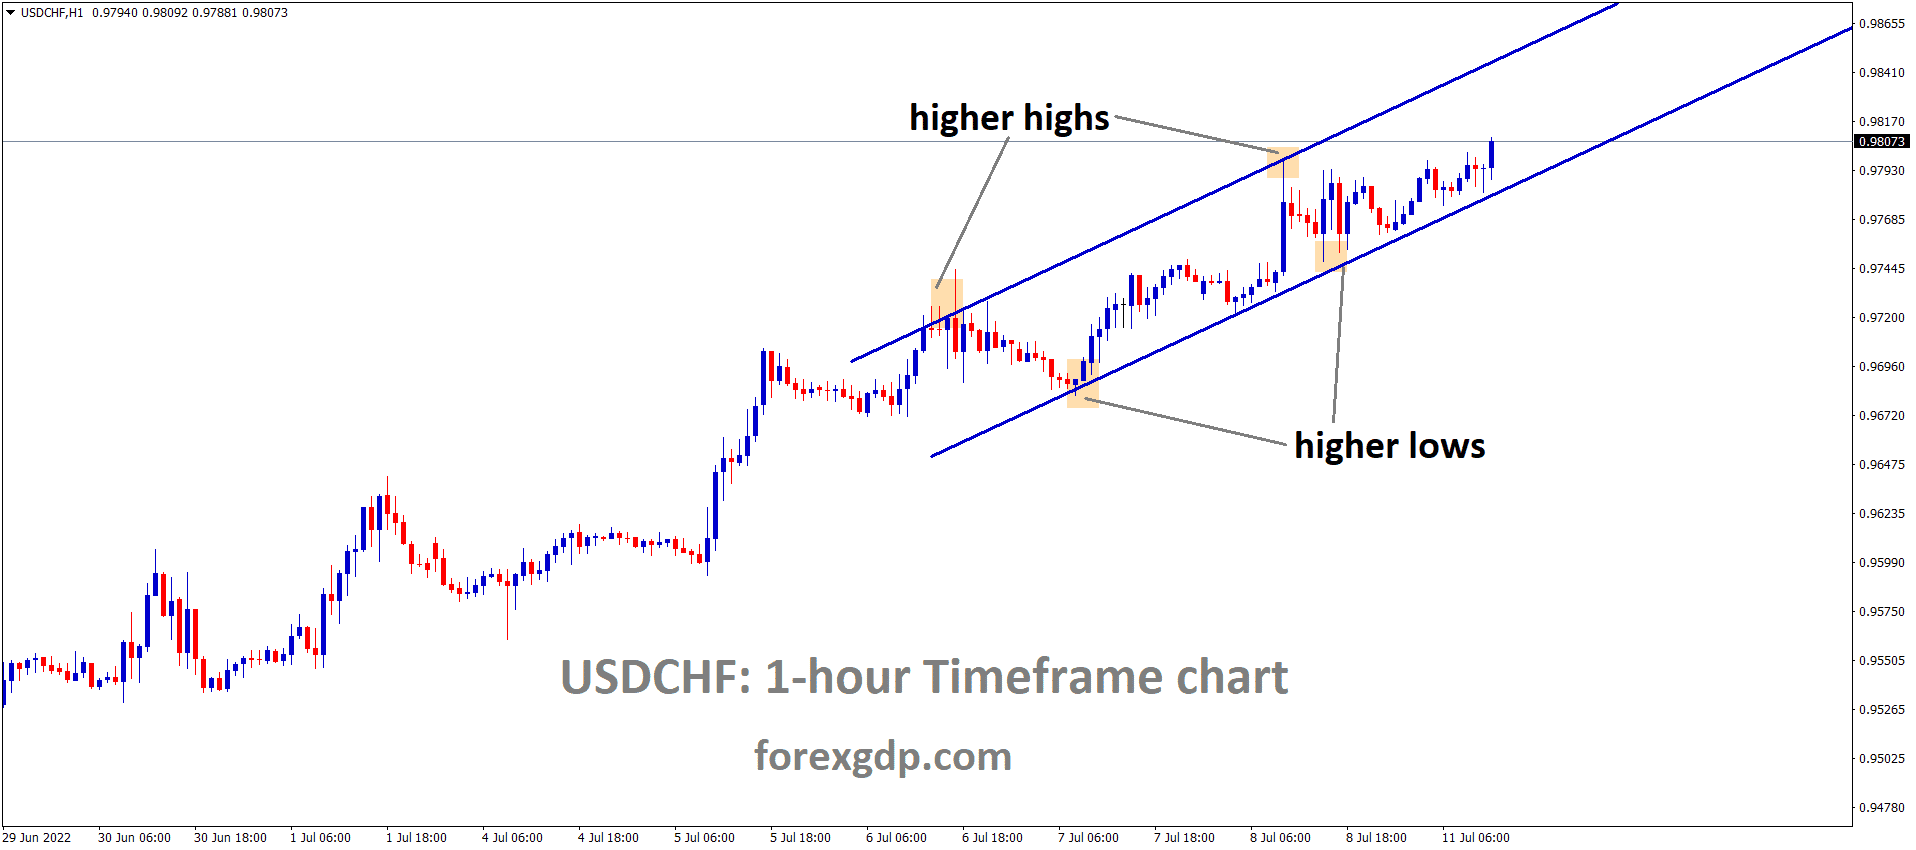 USDCHF is moving in an Ascending channel and the Market has rebounded from the higher low area of the Ascending channel